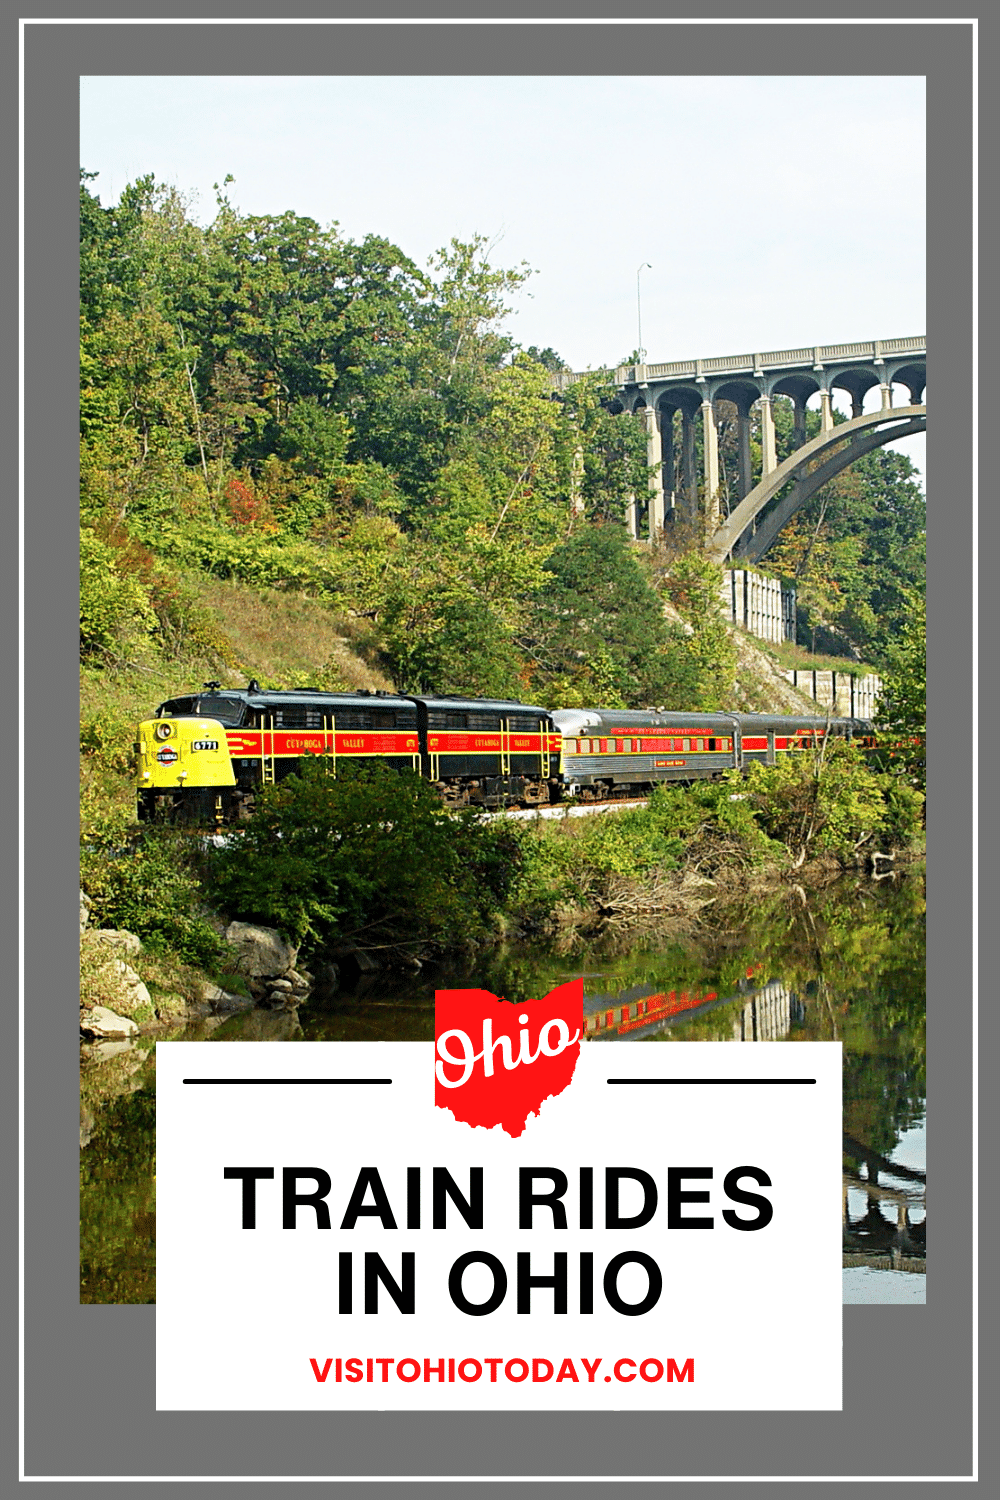 Train rides are sometimes necessary, but they are so enjoyable when they are taken for fun! Here are nine train rides in Ohio that will entertain the entire family. Enjoy scenic Ohio from the comfort of a railway car!